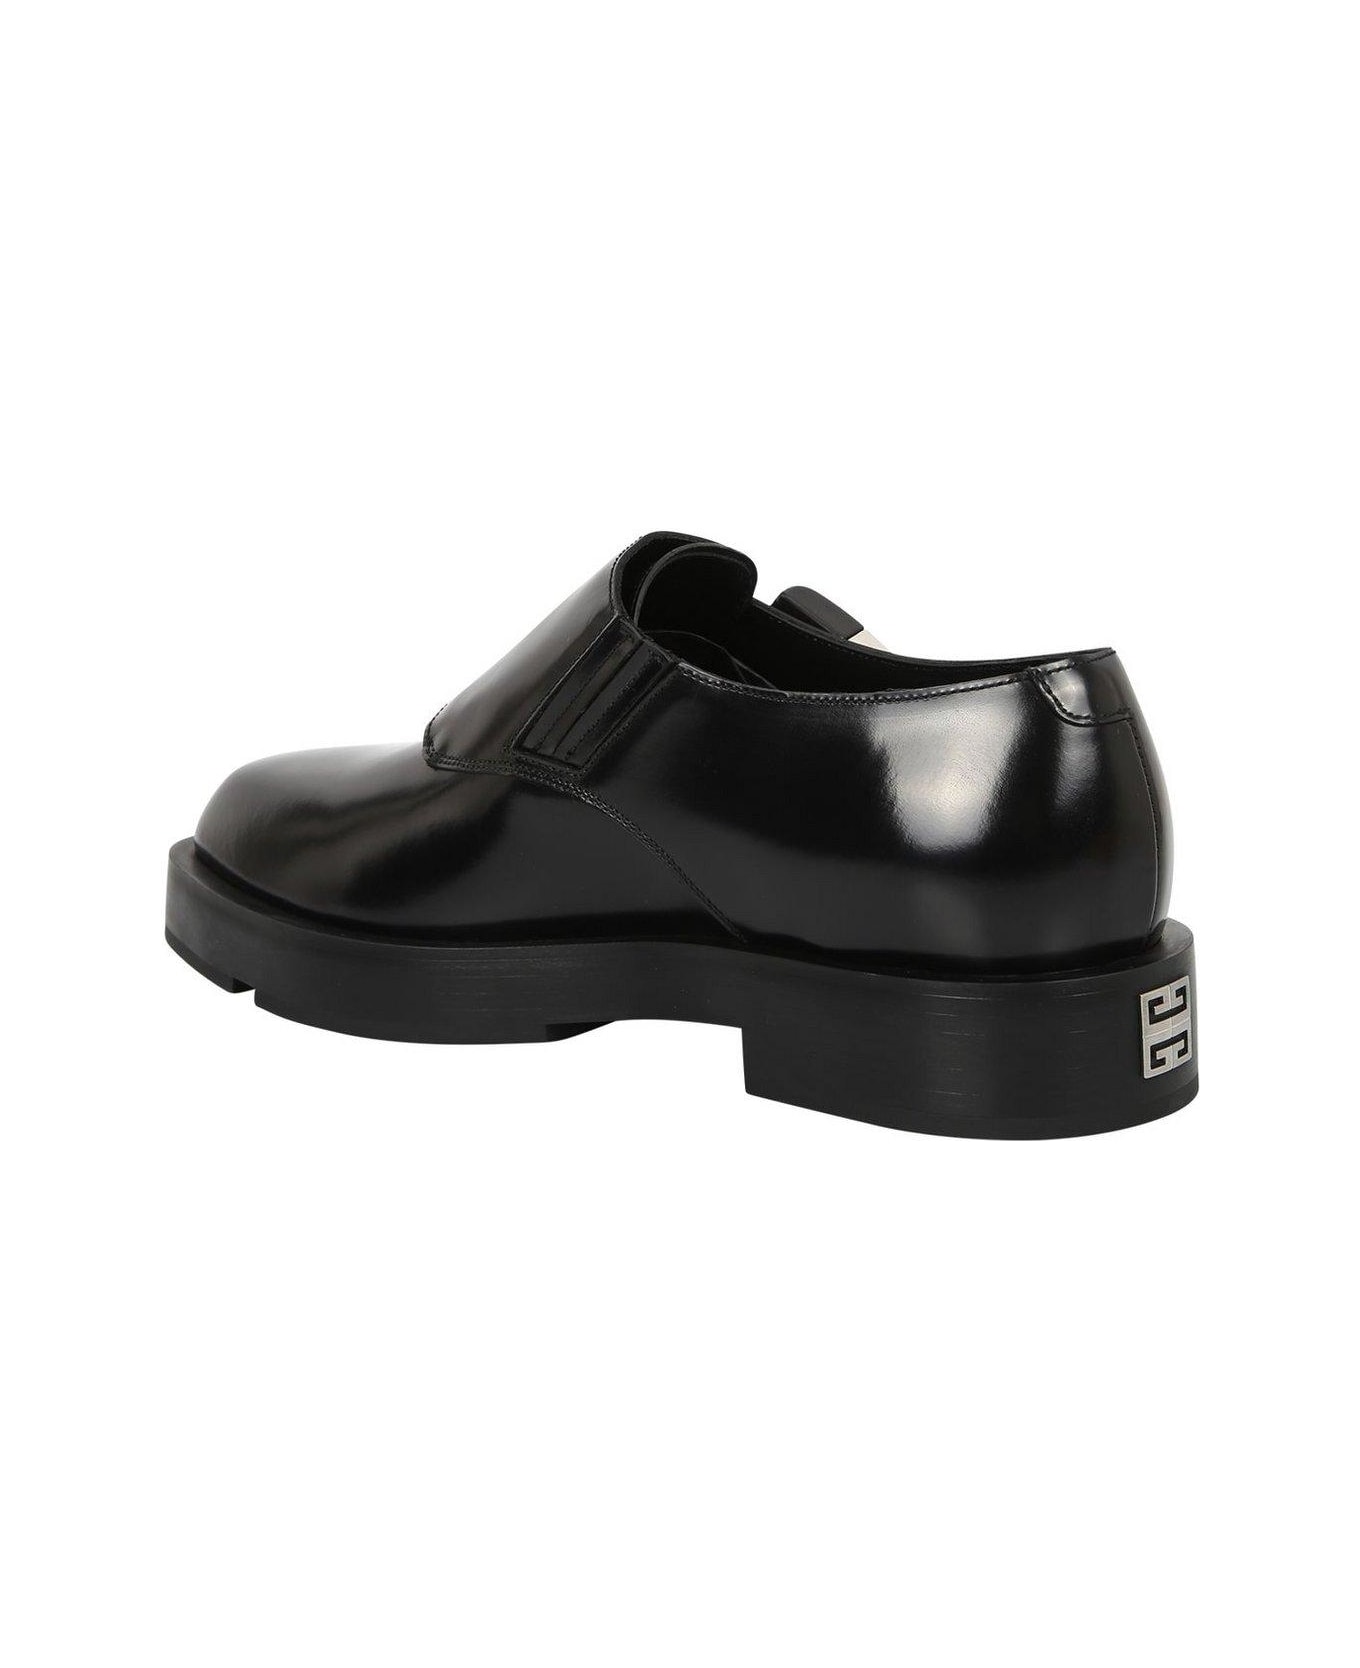 Givenchy Logo Plaque Squared Derby Shoes - Nero